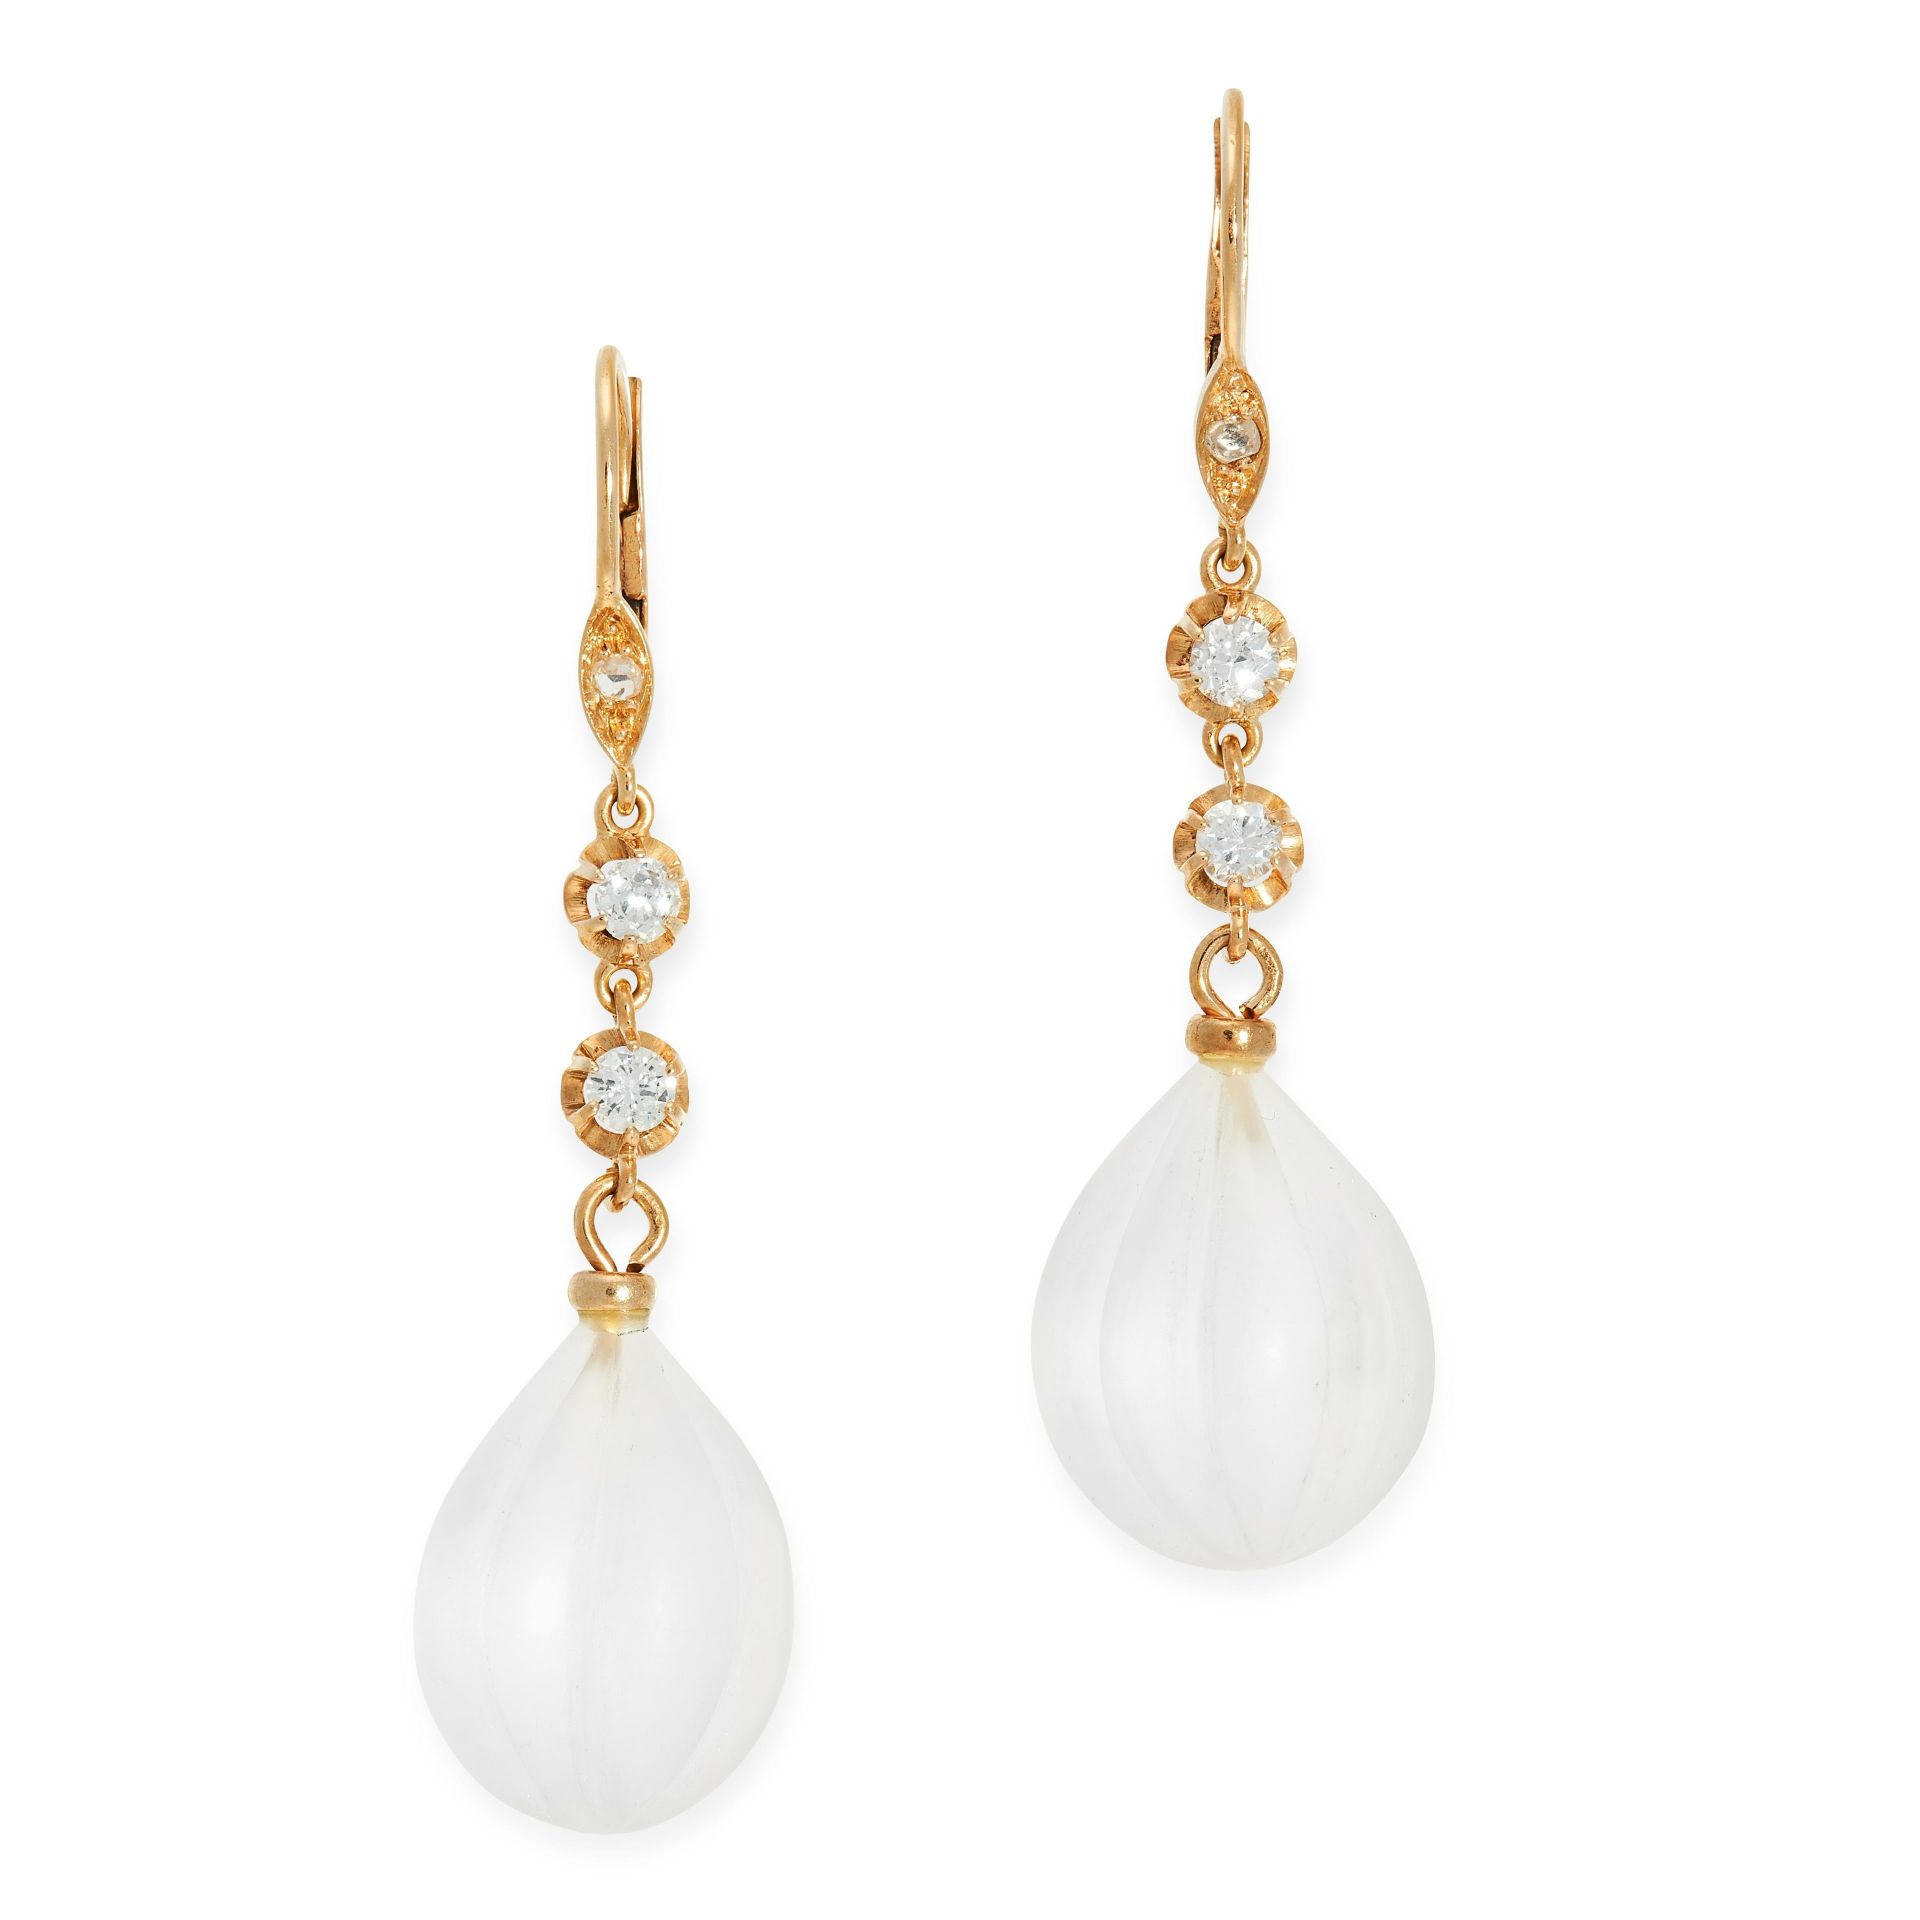 A PAIR OF ANTIQUE FROSTED GLASS AND DIAMOND DROP EARRINGS in high carat yellow gold, each set with a